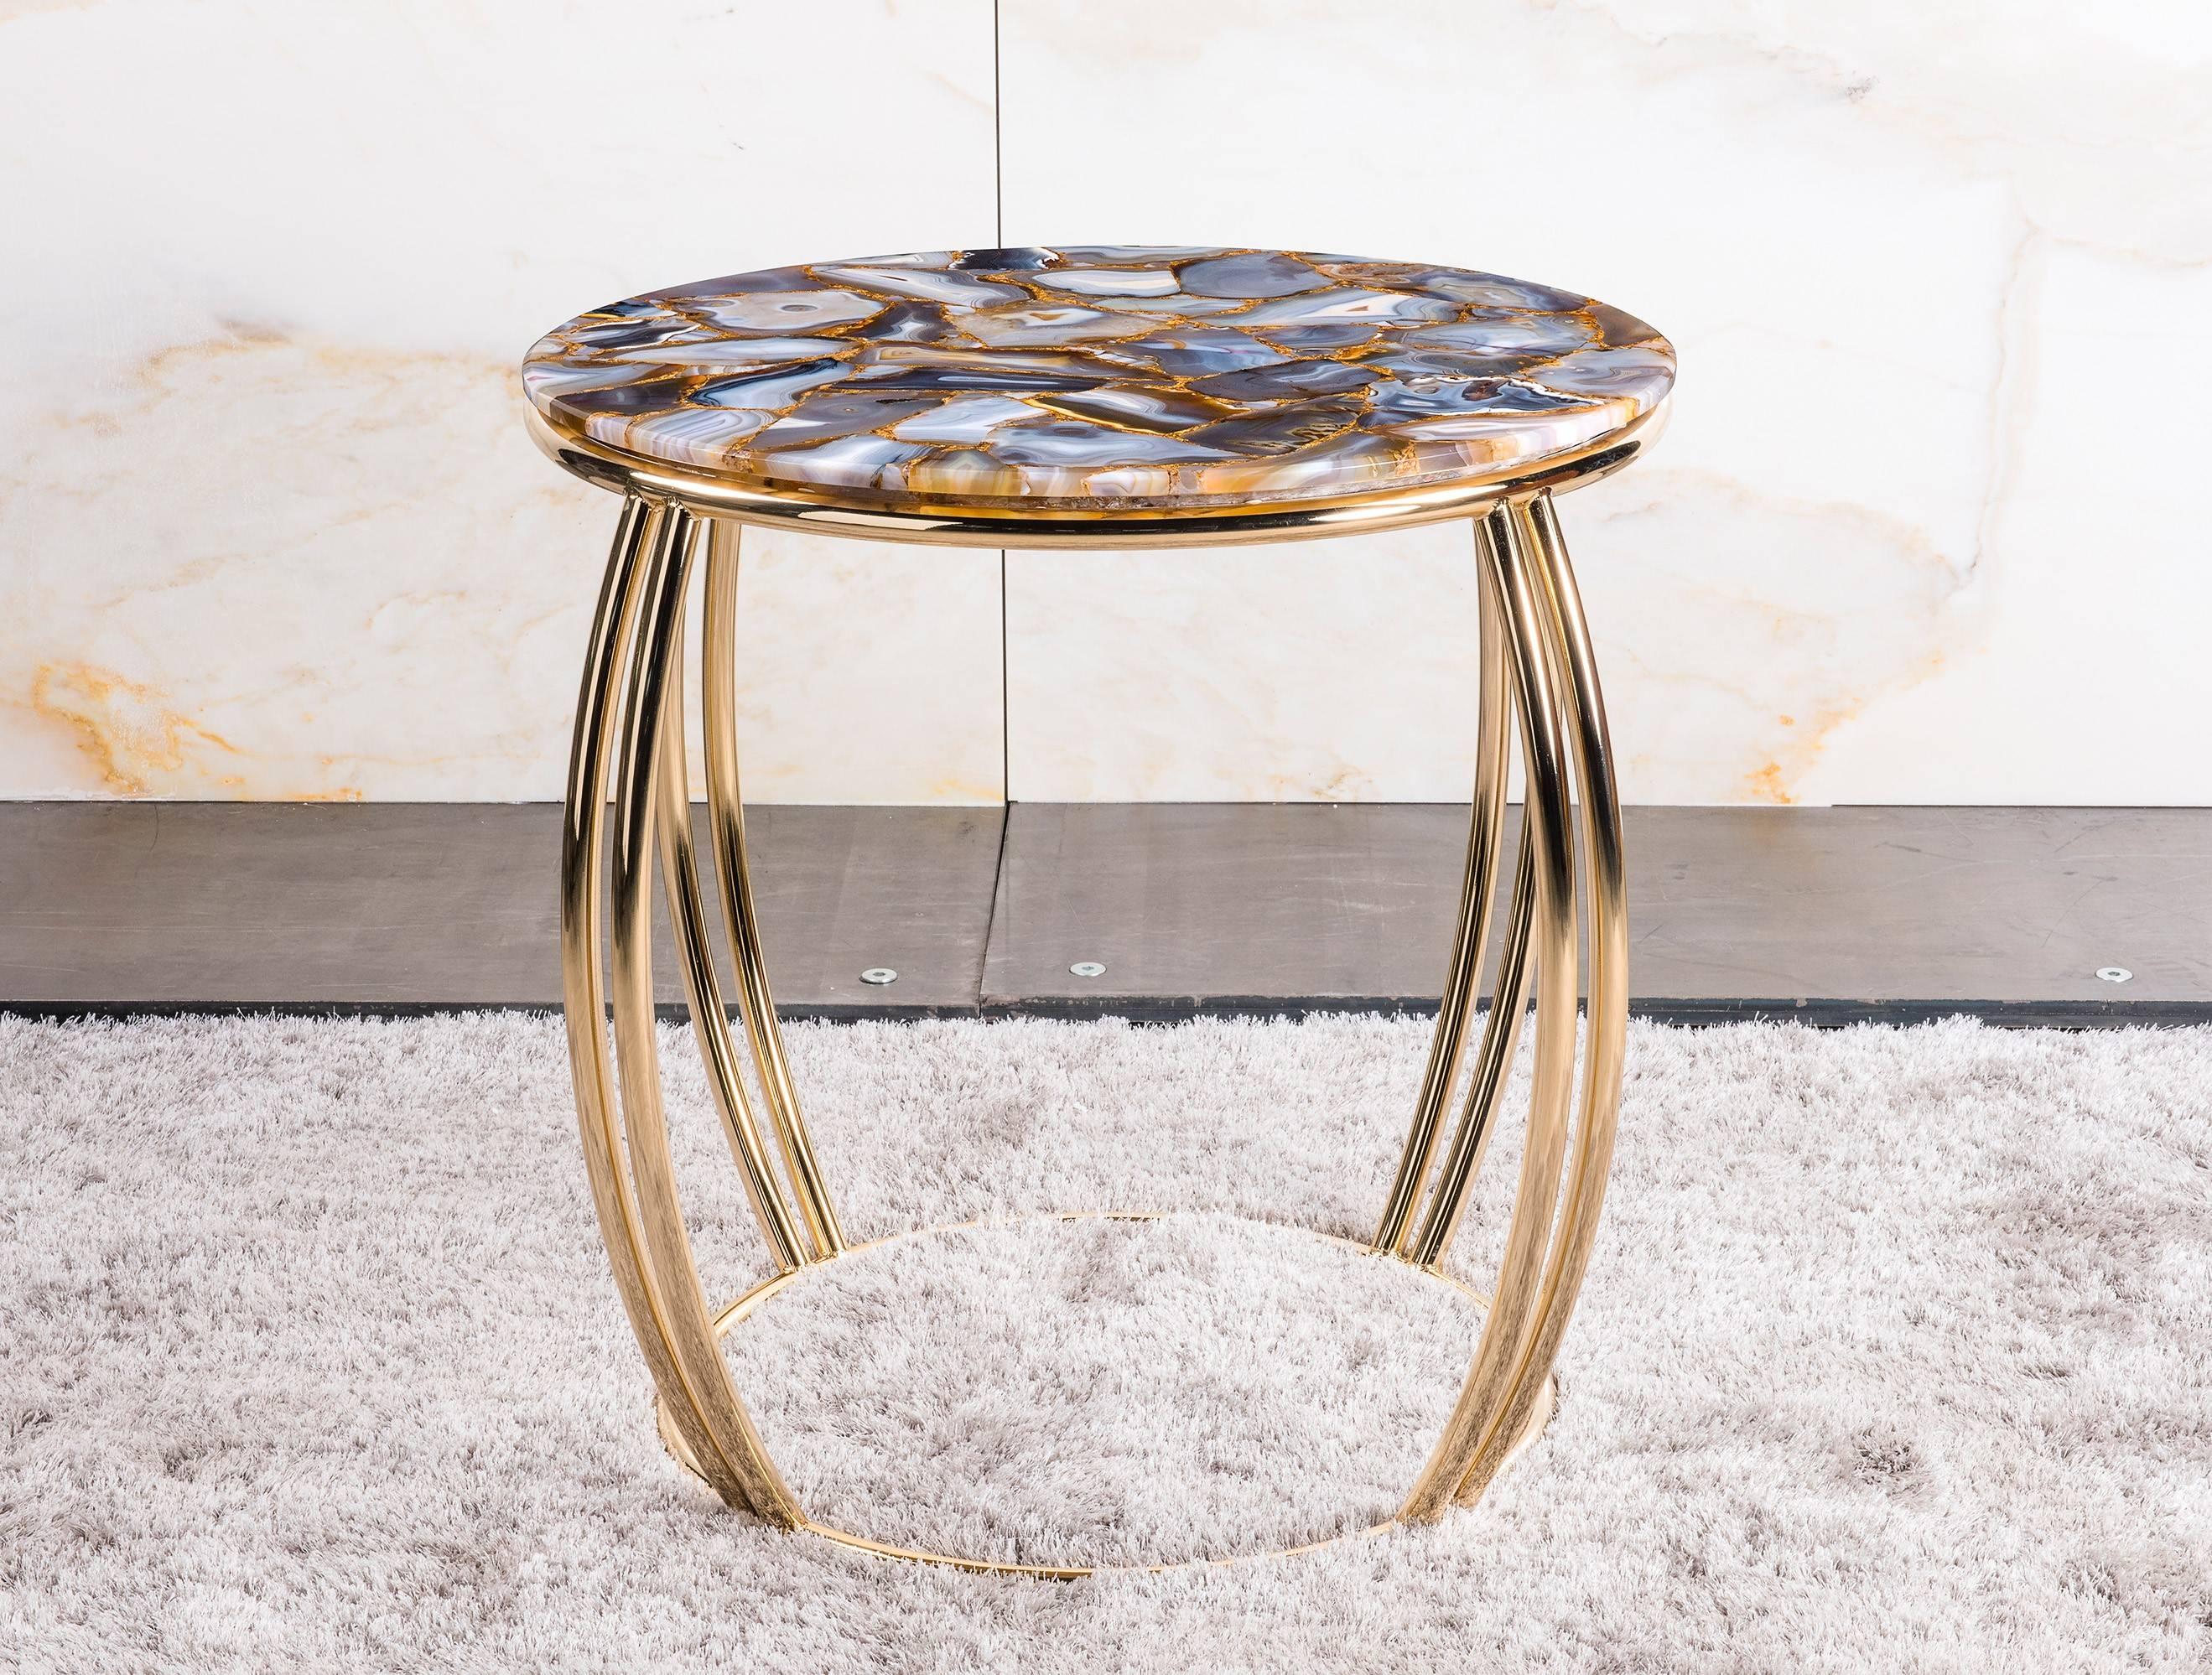 Organic Modern Side Table Model Arco, Agate Rubane Top and Massive Stainless Steel Base For Sale